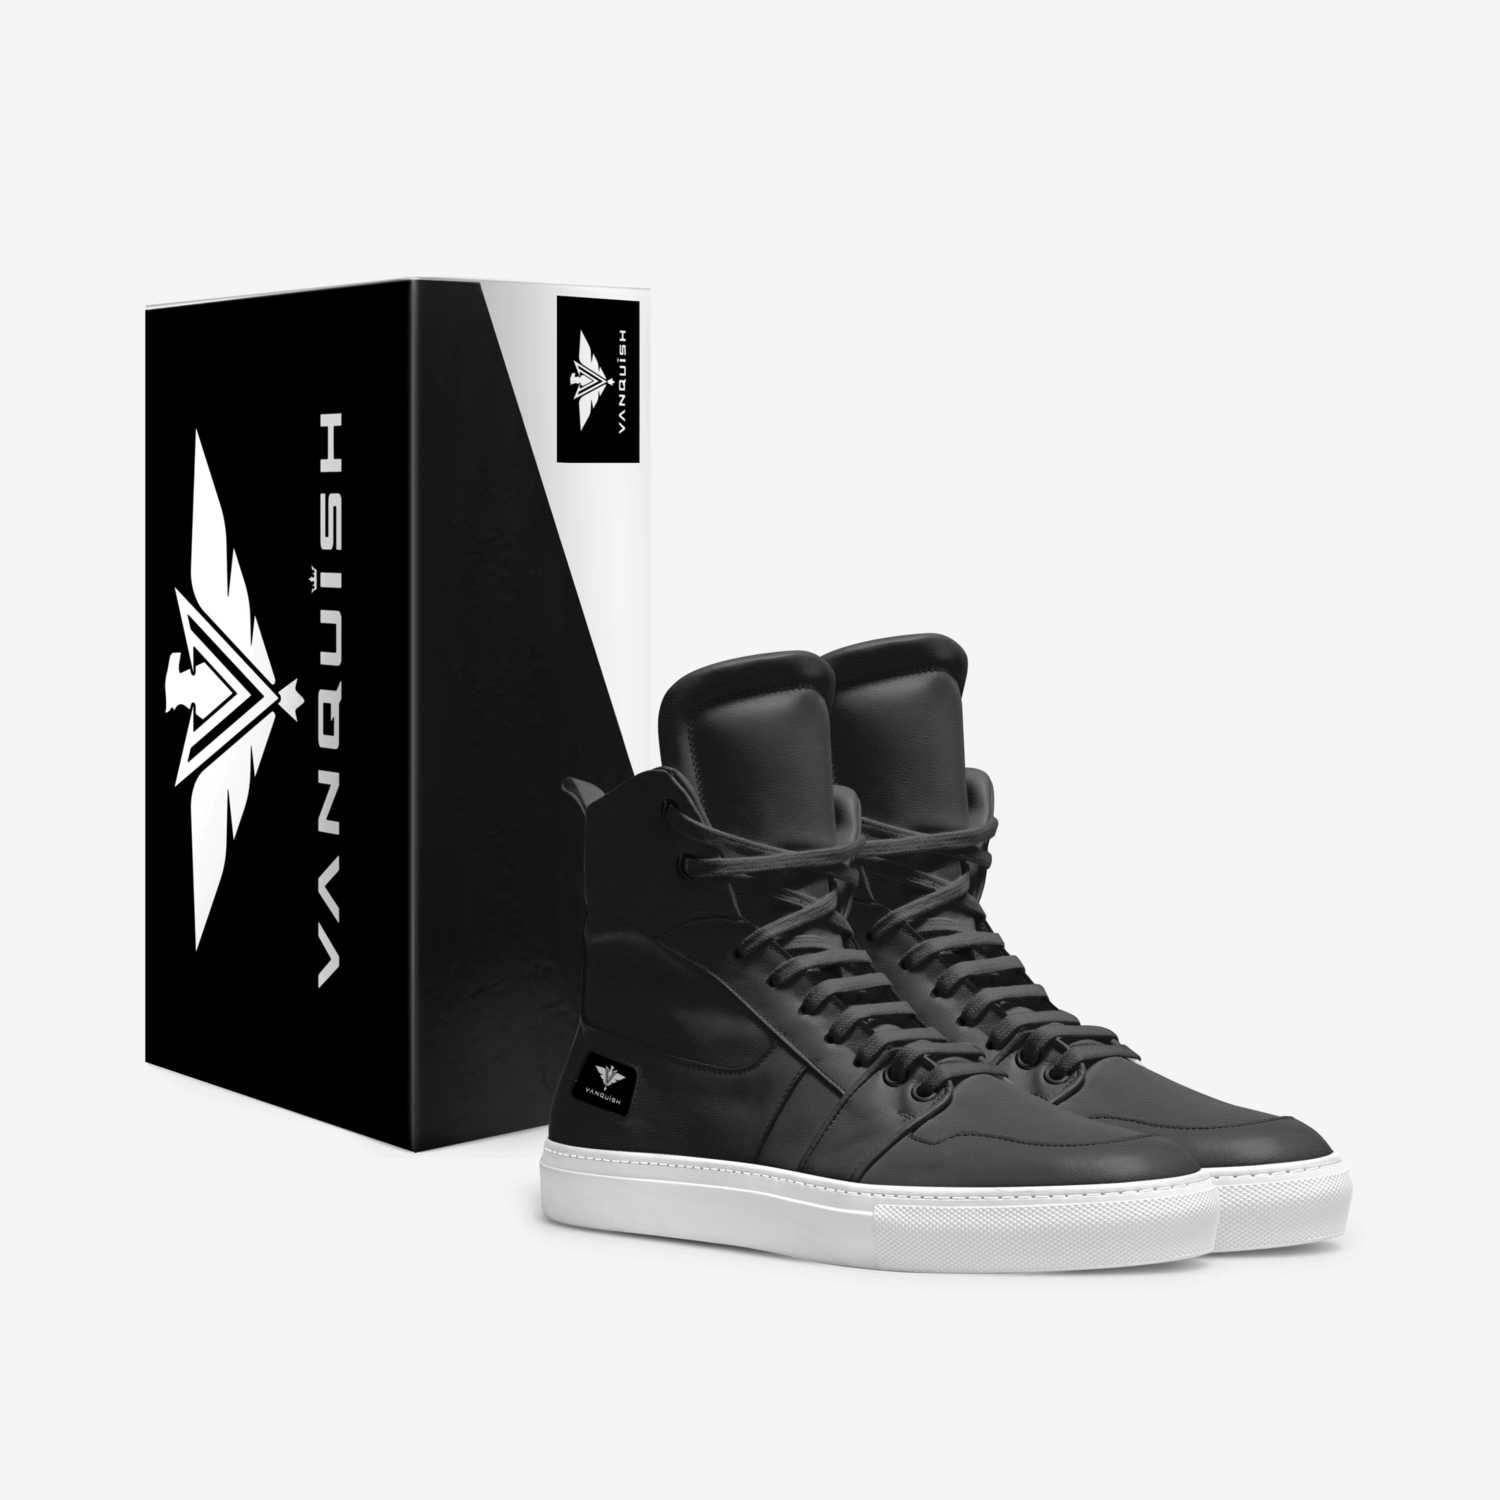 NME III custom made in Italy shoes by Aaron Diesel | Box view